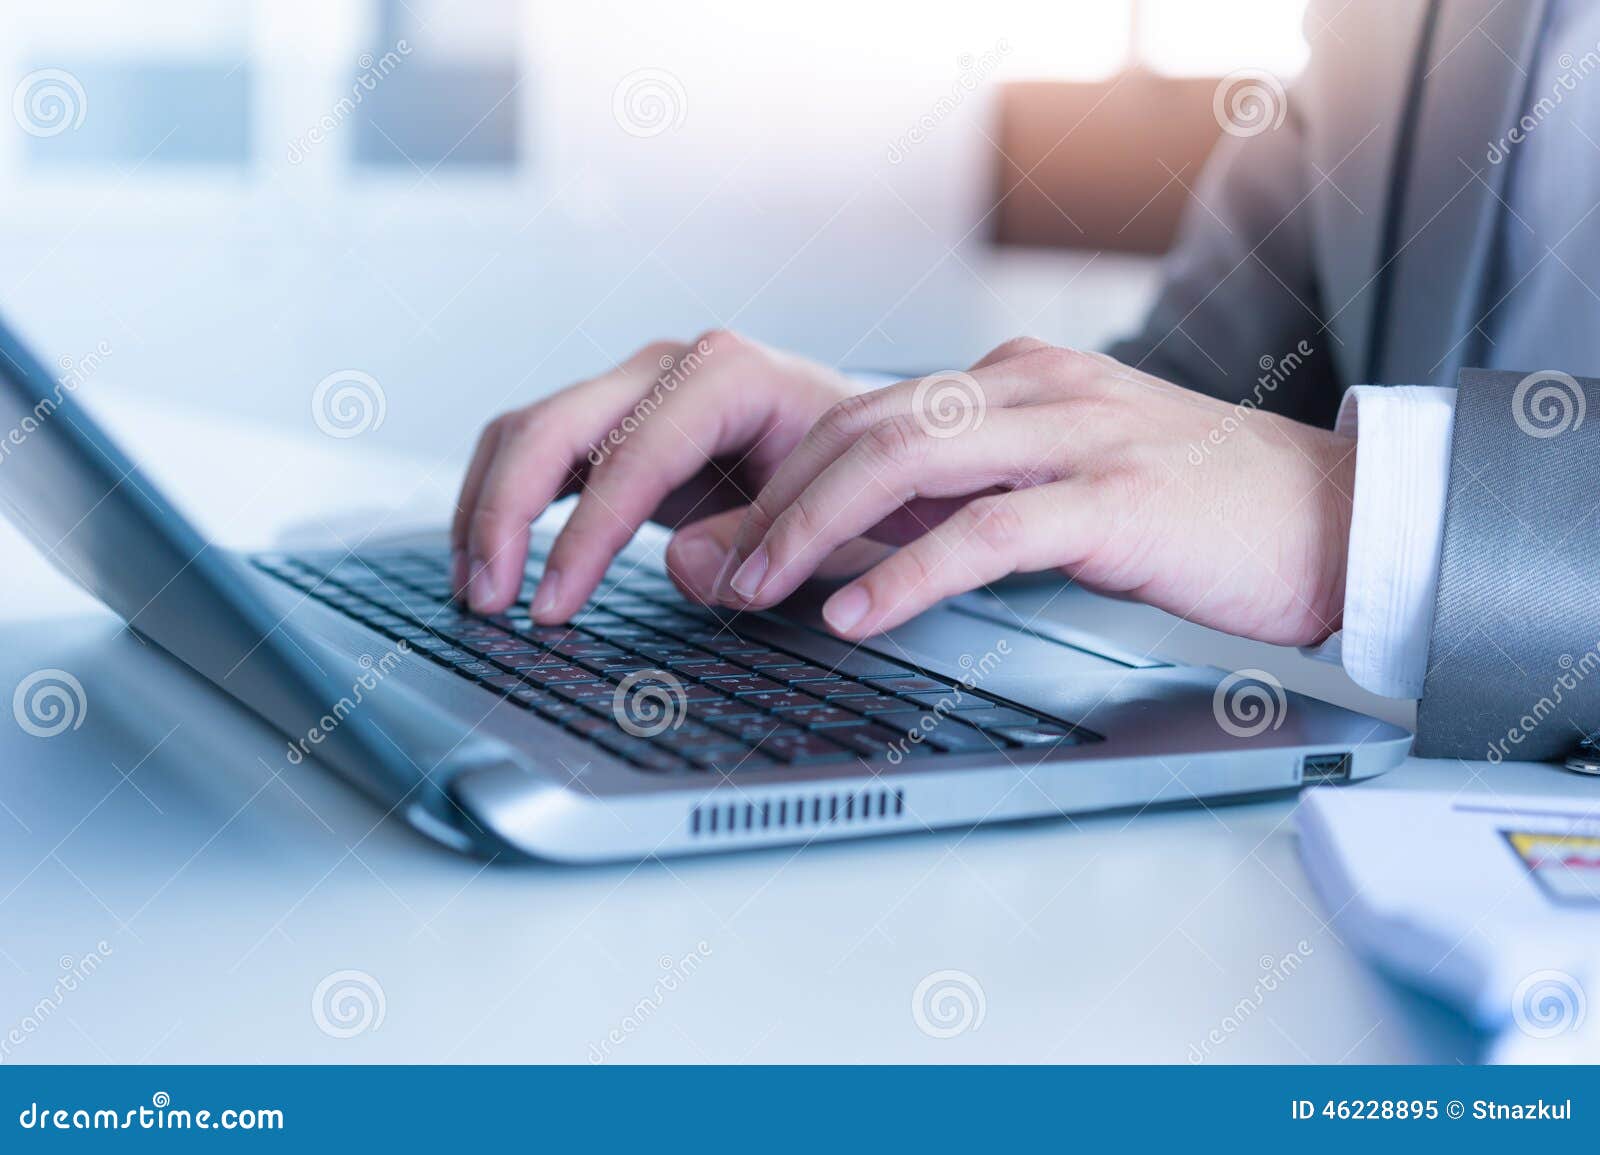 close up of business man hands typing on laptop computer